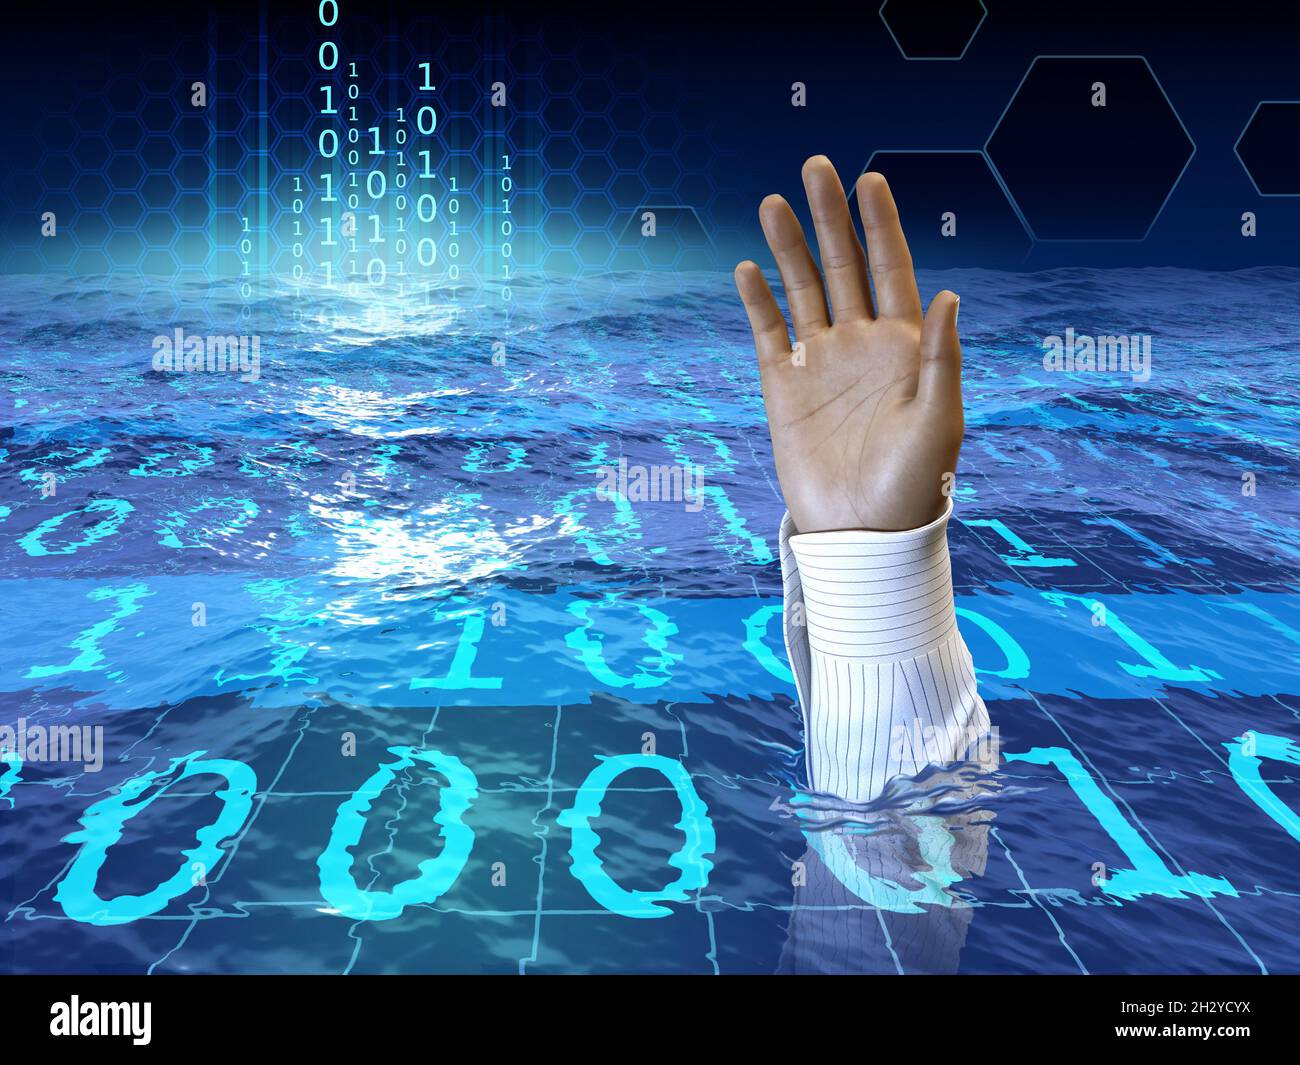 Man asking for help while drowning in a sea of digital data. Digital illustration. Stock Photo